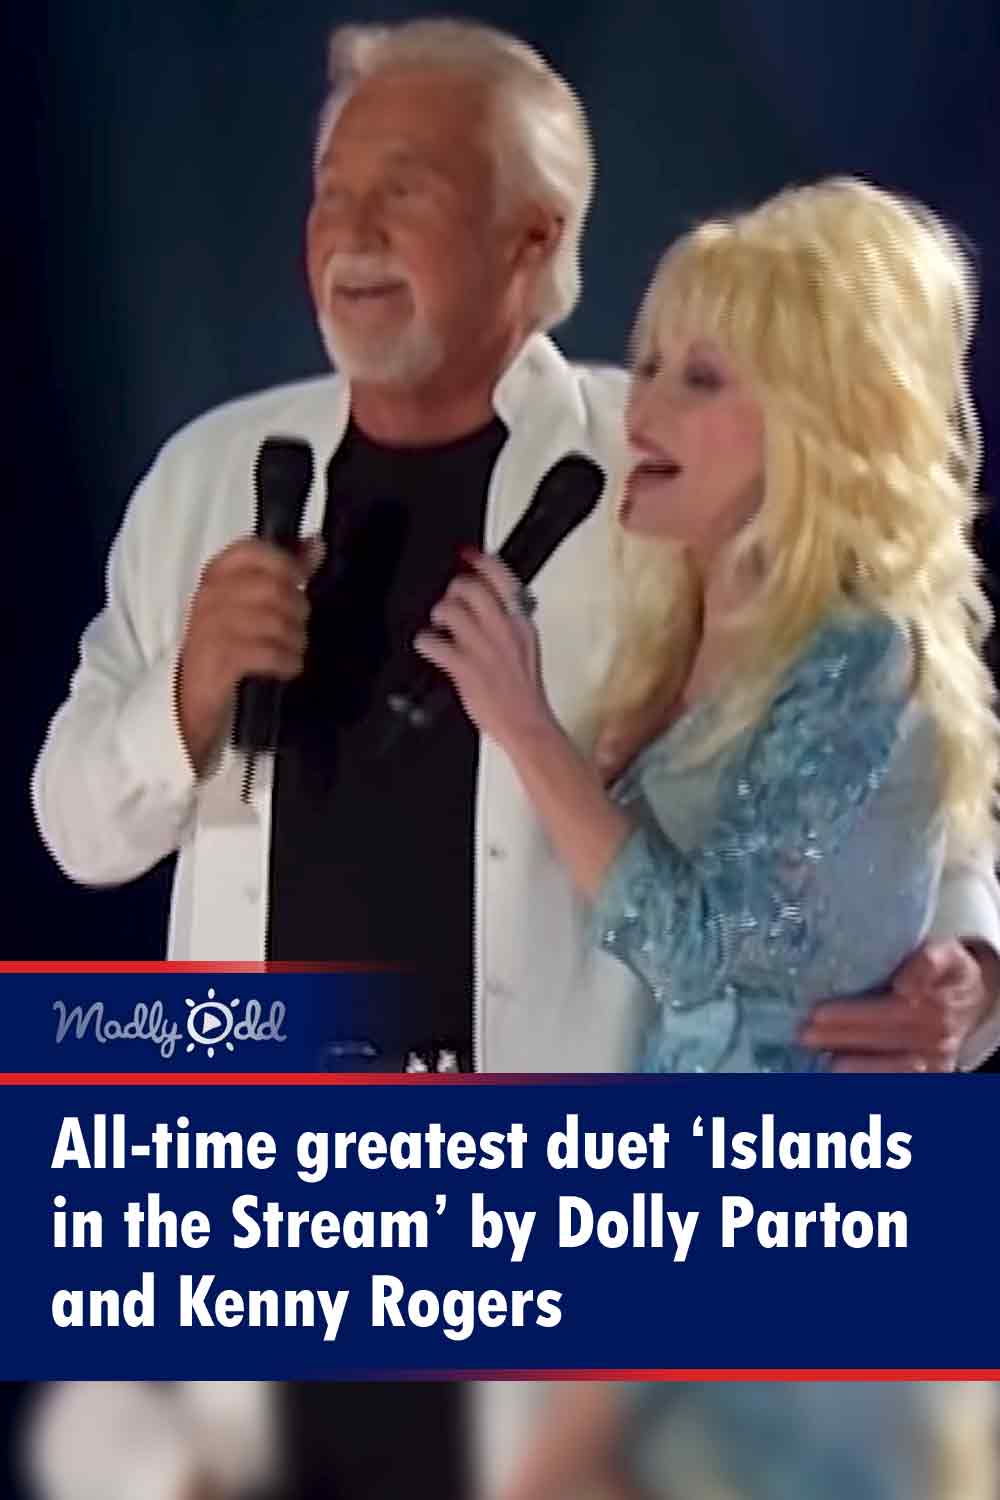 All-time greatest duet ‘Islands in the Stream’ by Dolly Parton and Kenny Rogers